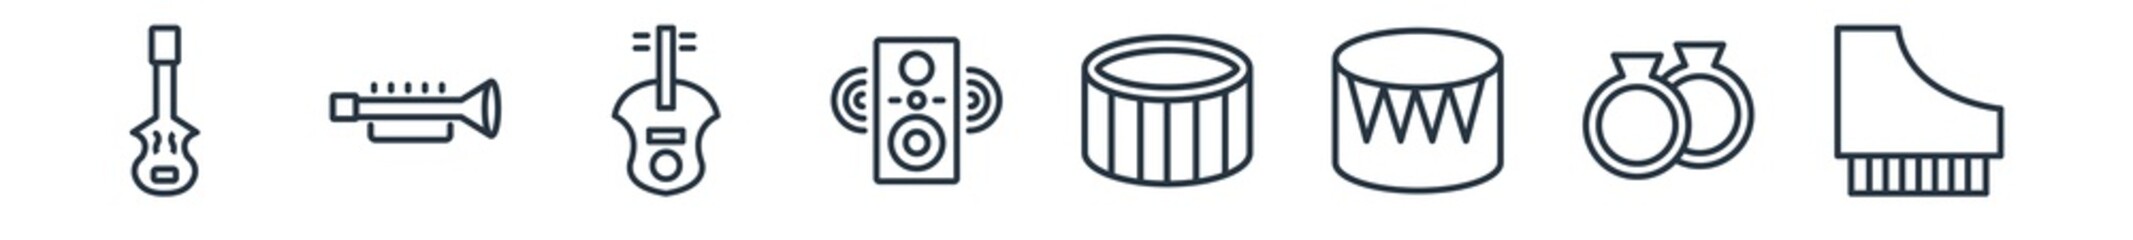 linear set of music outline icons. line vector icons such as double bass, cornet, viola, sound system, snare drum, harpsichord vector illustration.